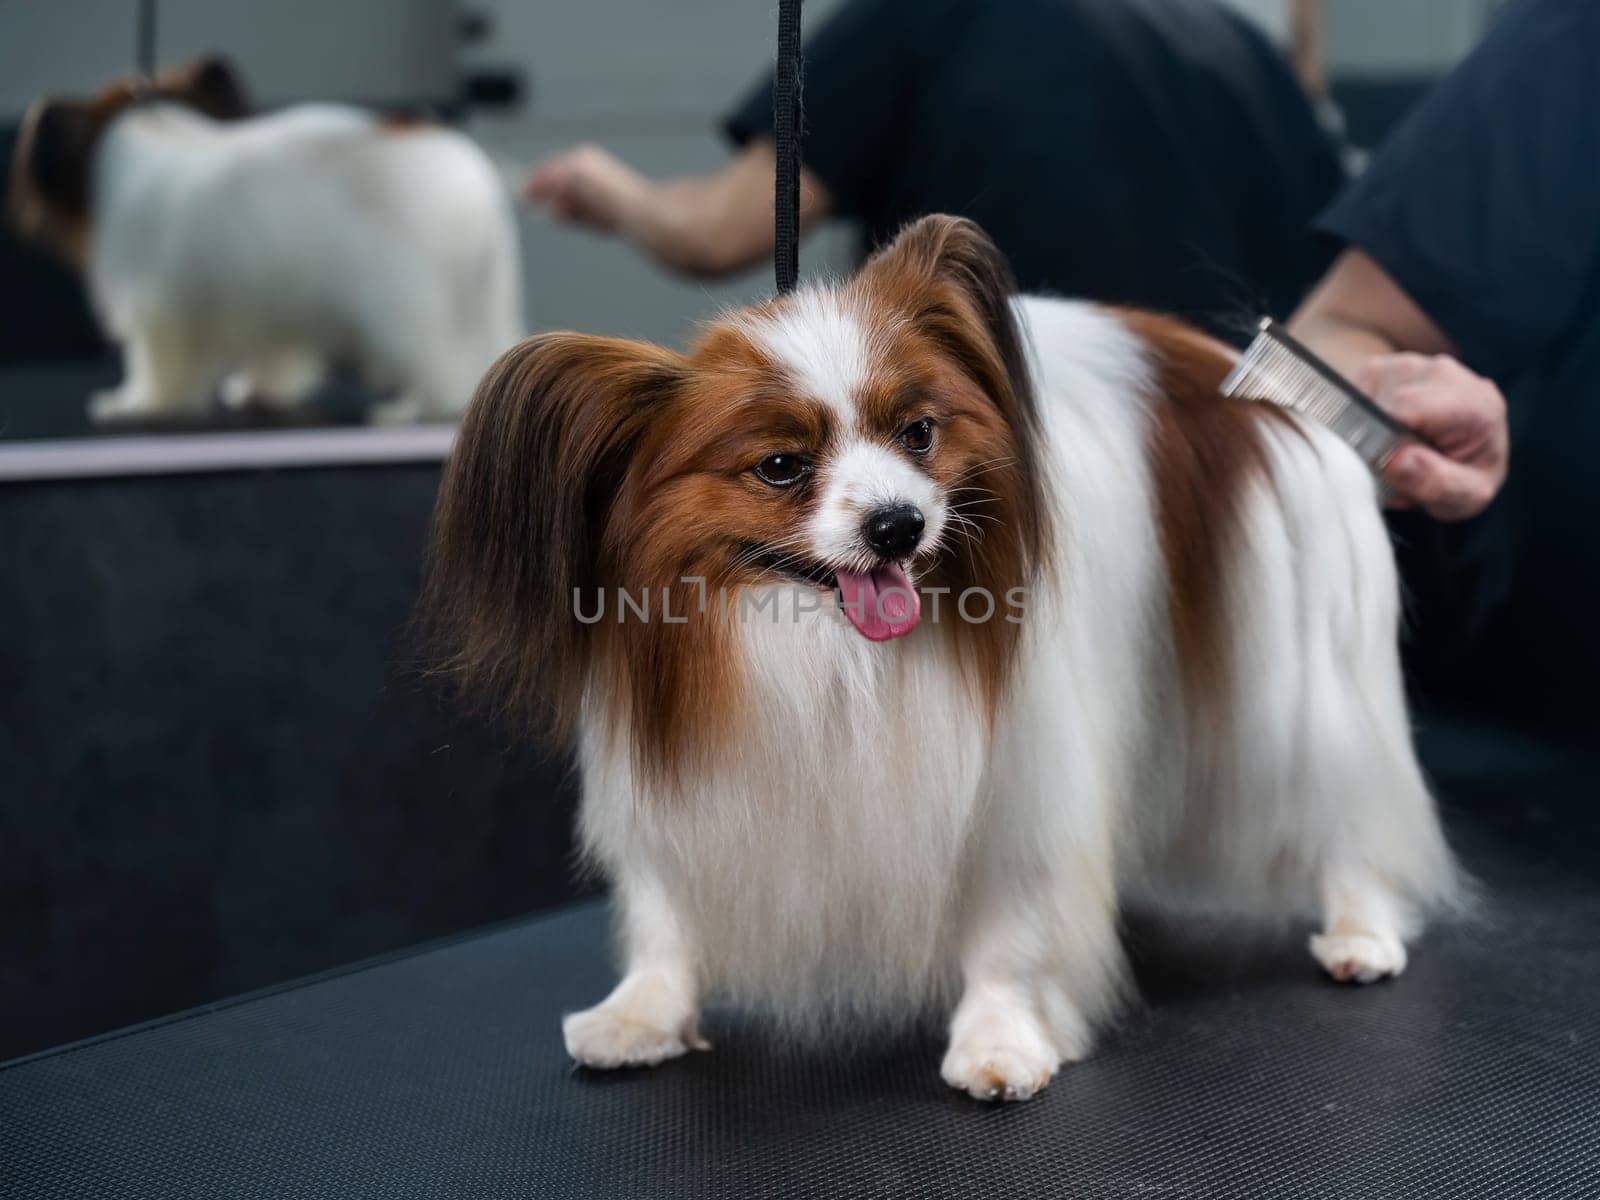 Caucasian woman combing a dog. Papillon Continental Spaniel with tongue hanging out at grooming